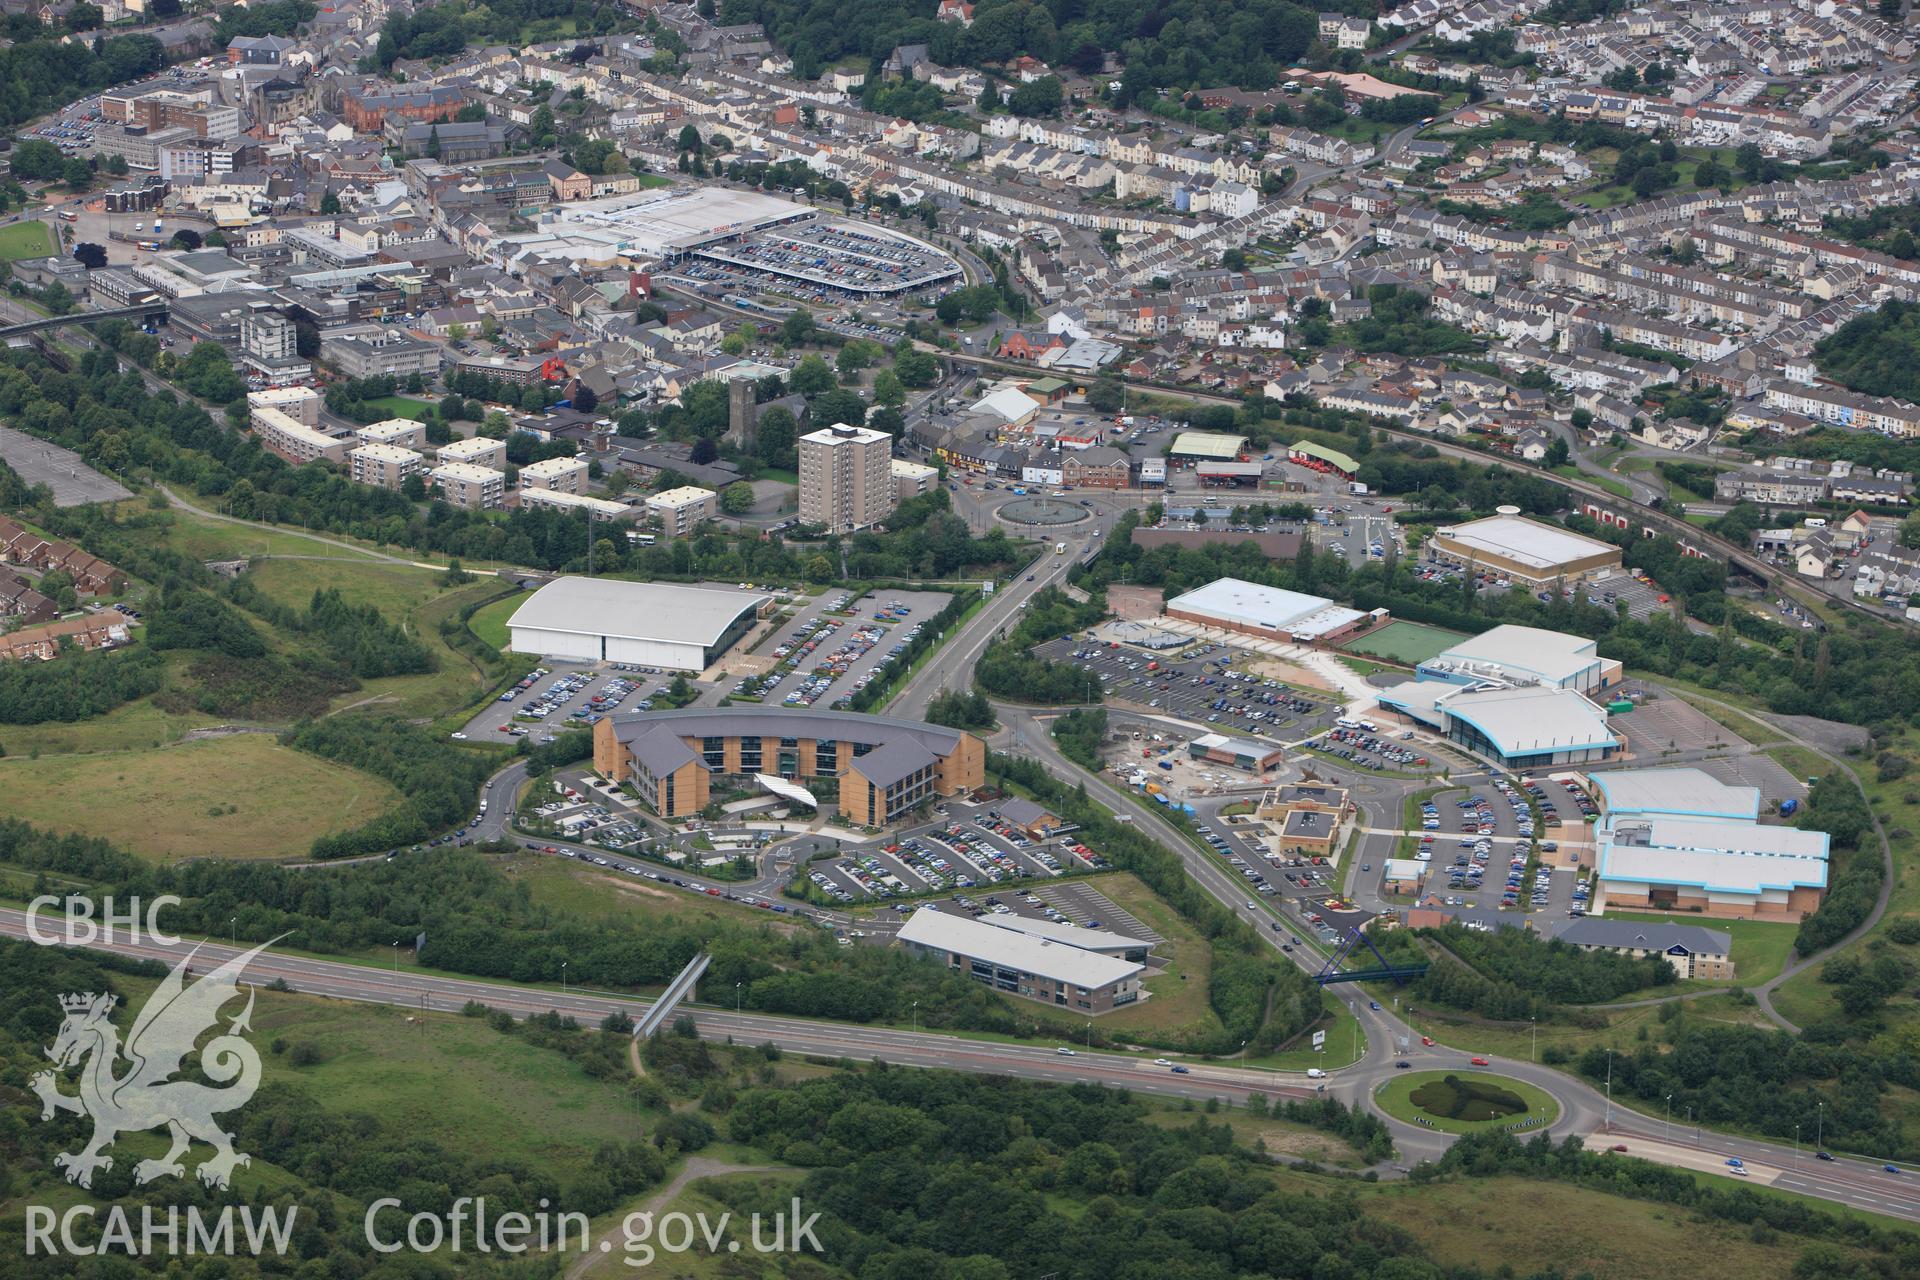 RCAHMW colour oblique photograph of Merthyr Tydfil, from the south showing the Welsh Assembly Government building in the foreground. Taken by Toby Driver on 29/07/2010.